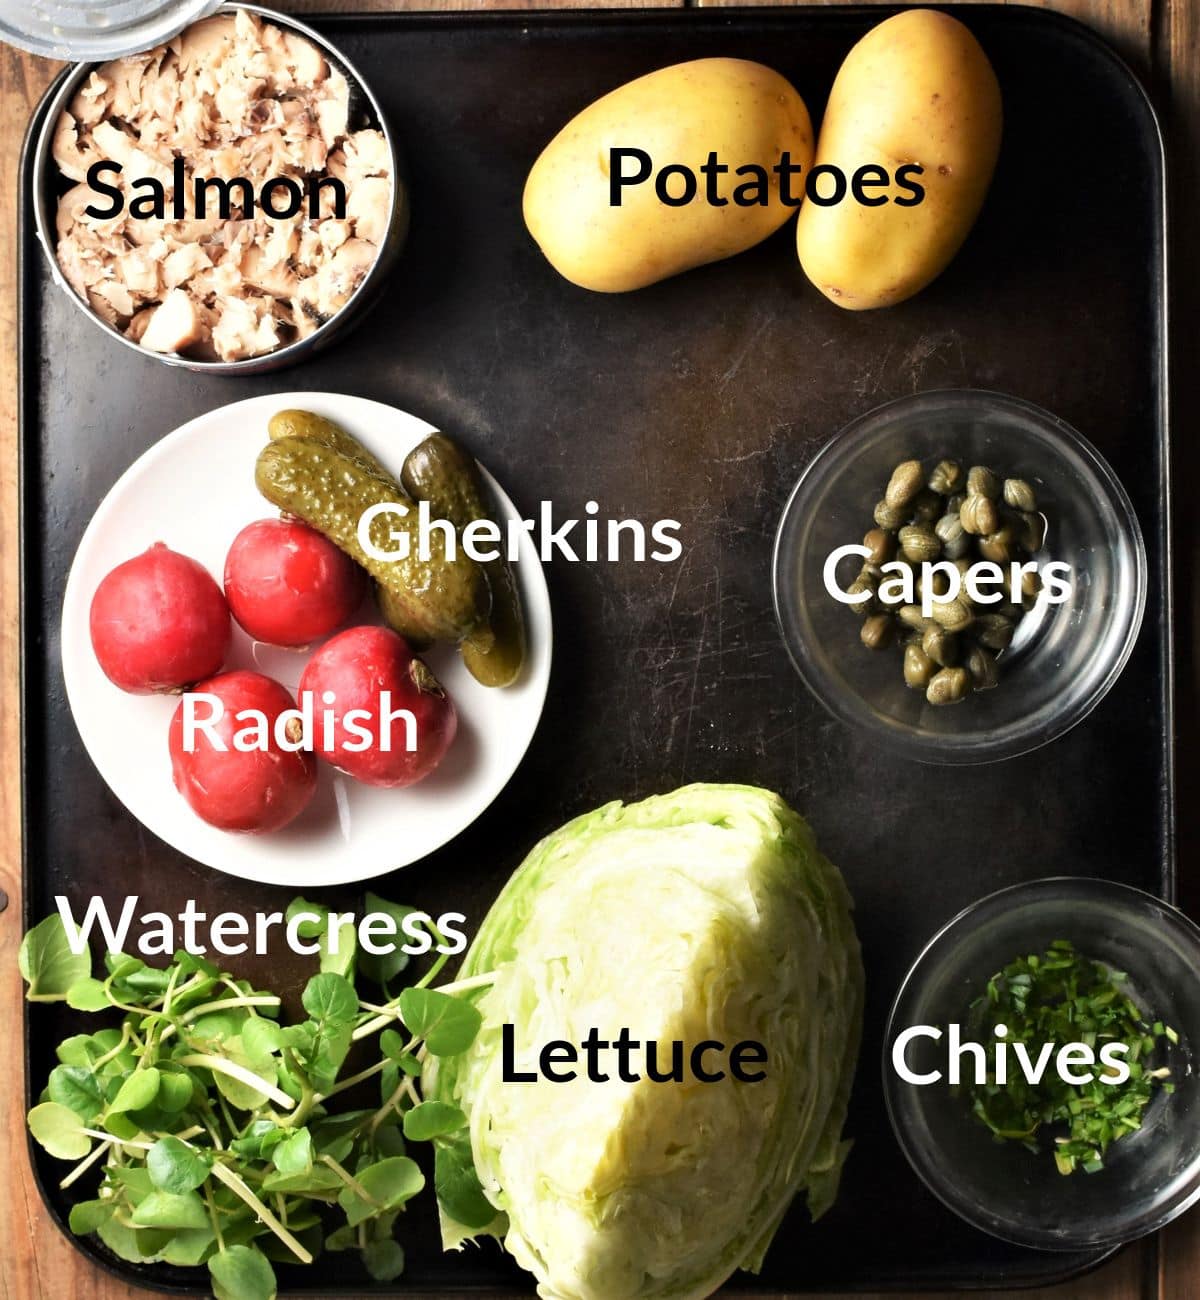 Ingredients for making salmon and potato salad in individual dishes.